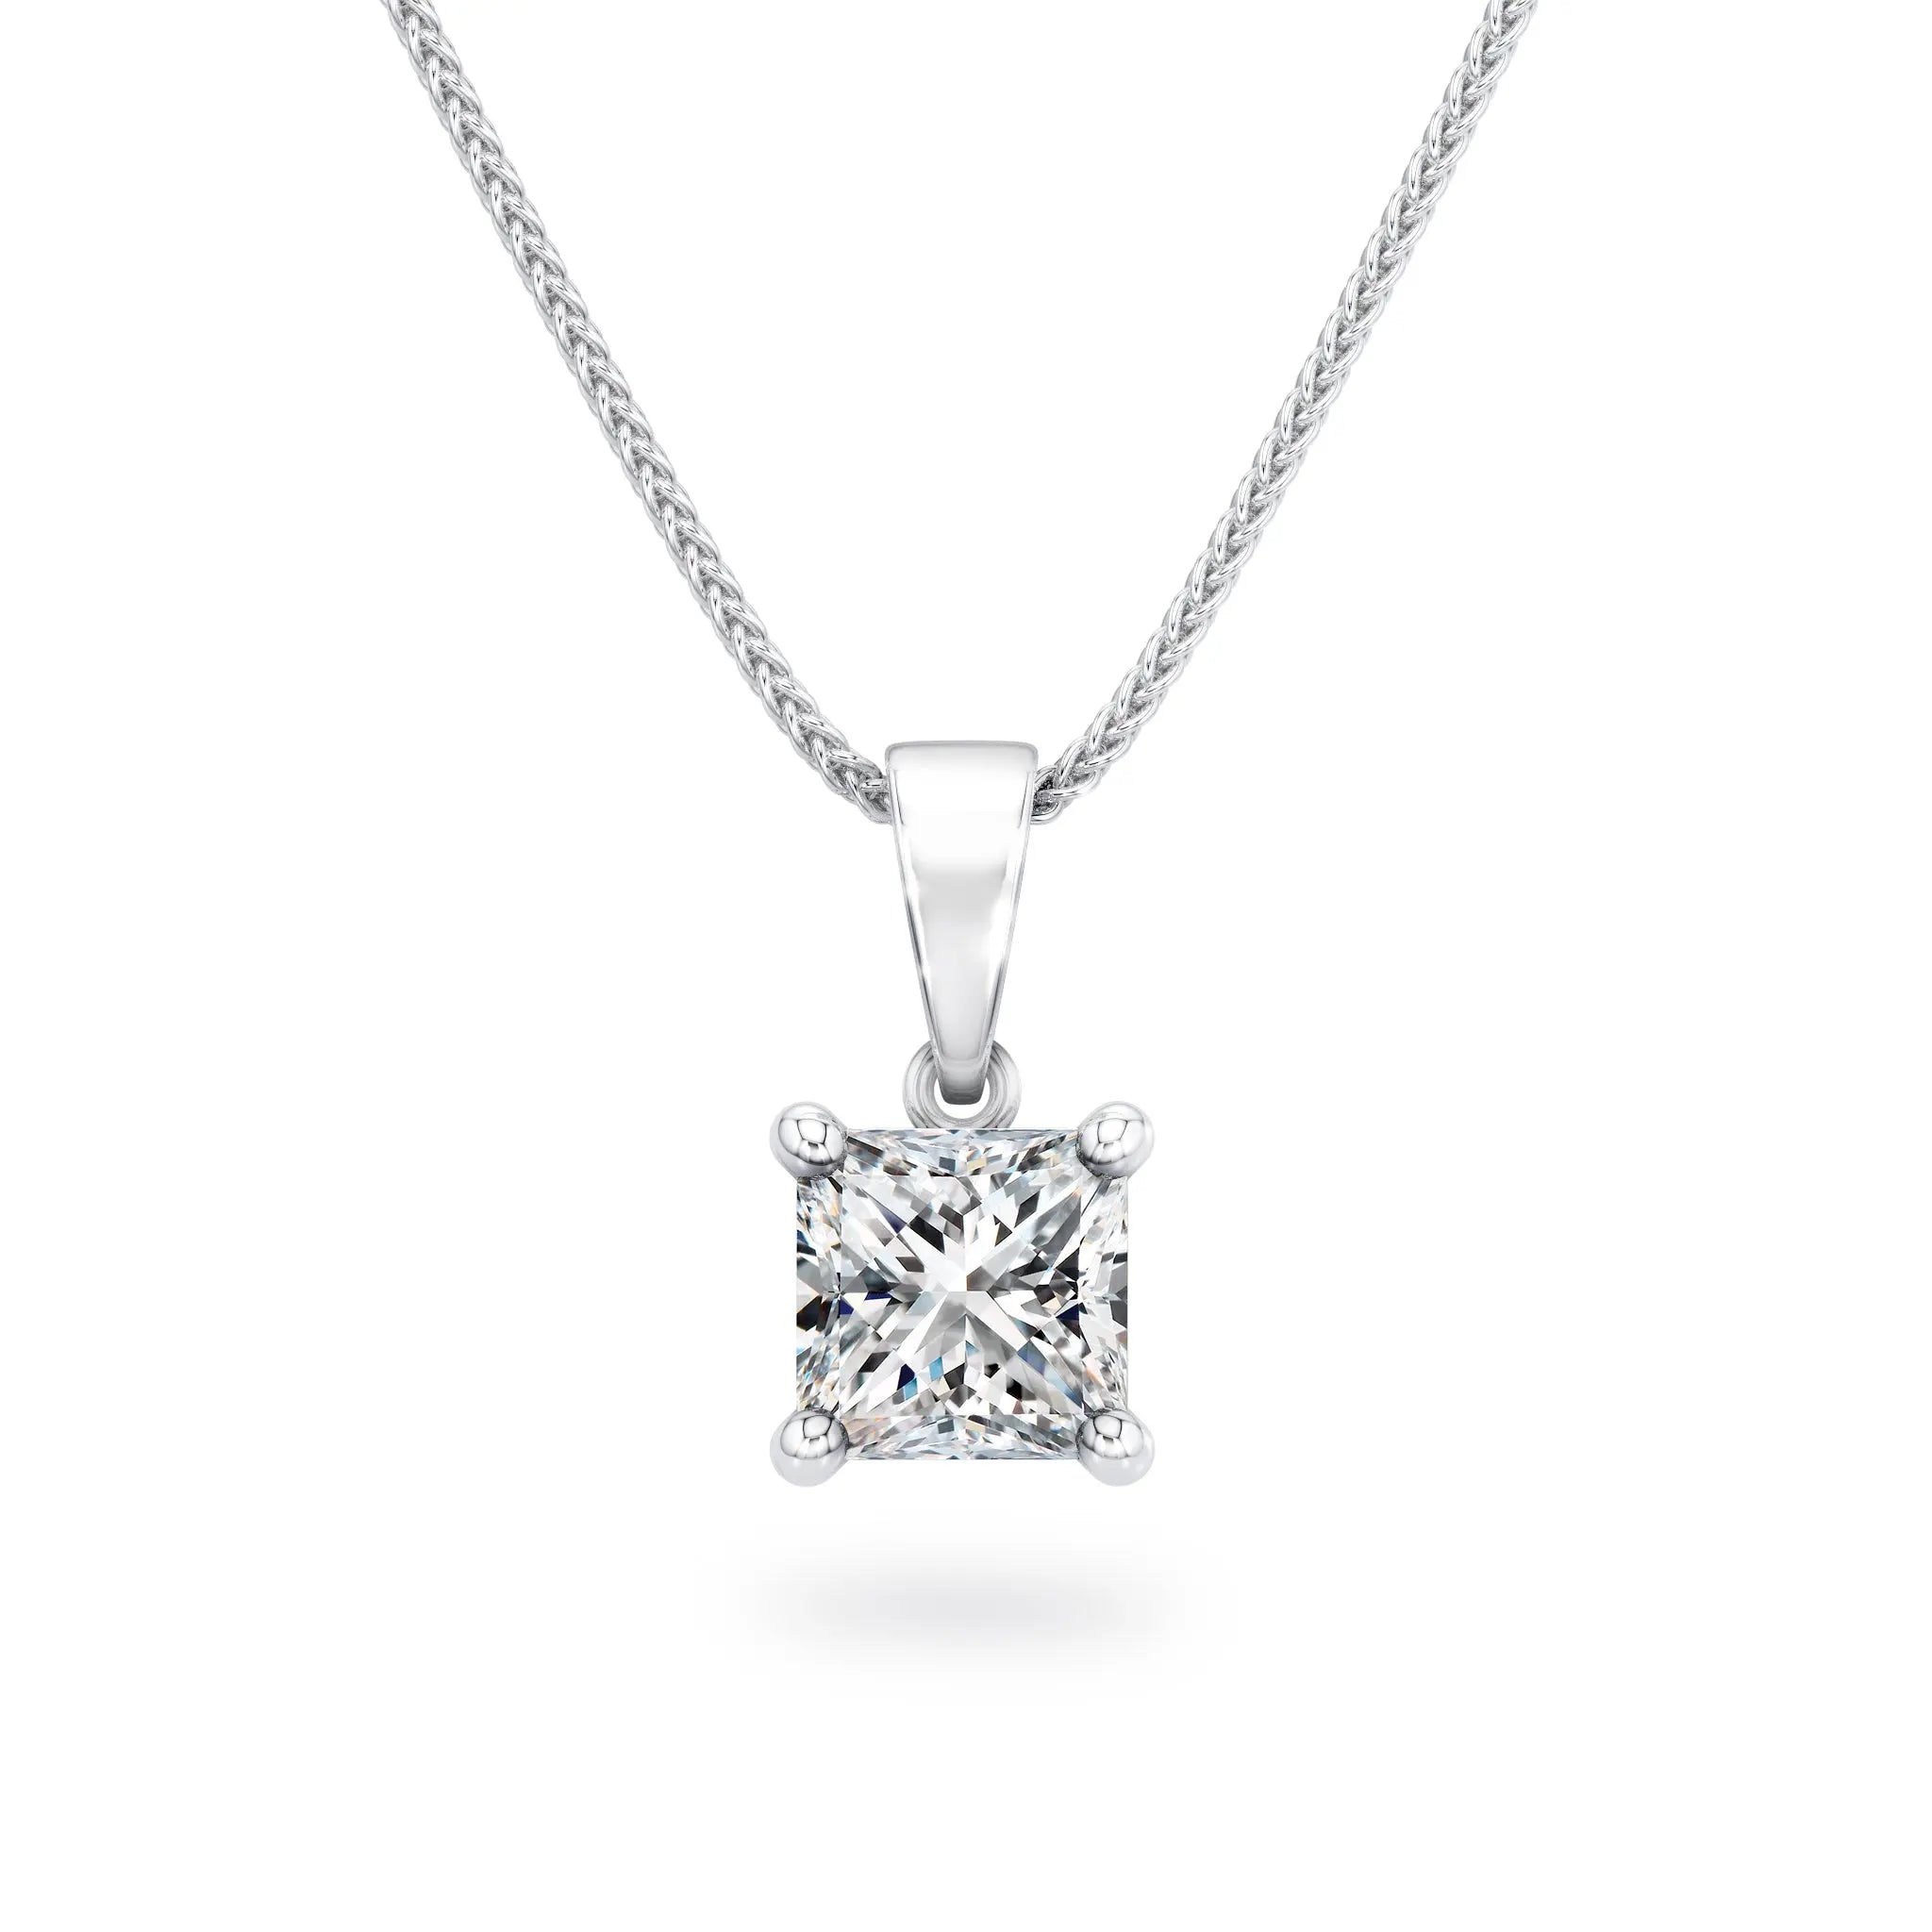 Shimansky - My Girl Solitaire Diamond Pendant 1.00ct Crafted in 18K White Gold